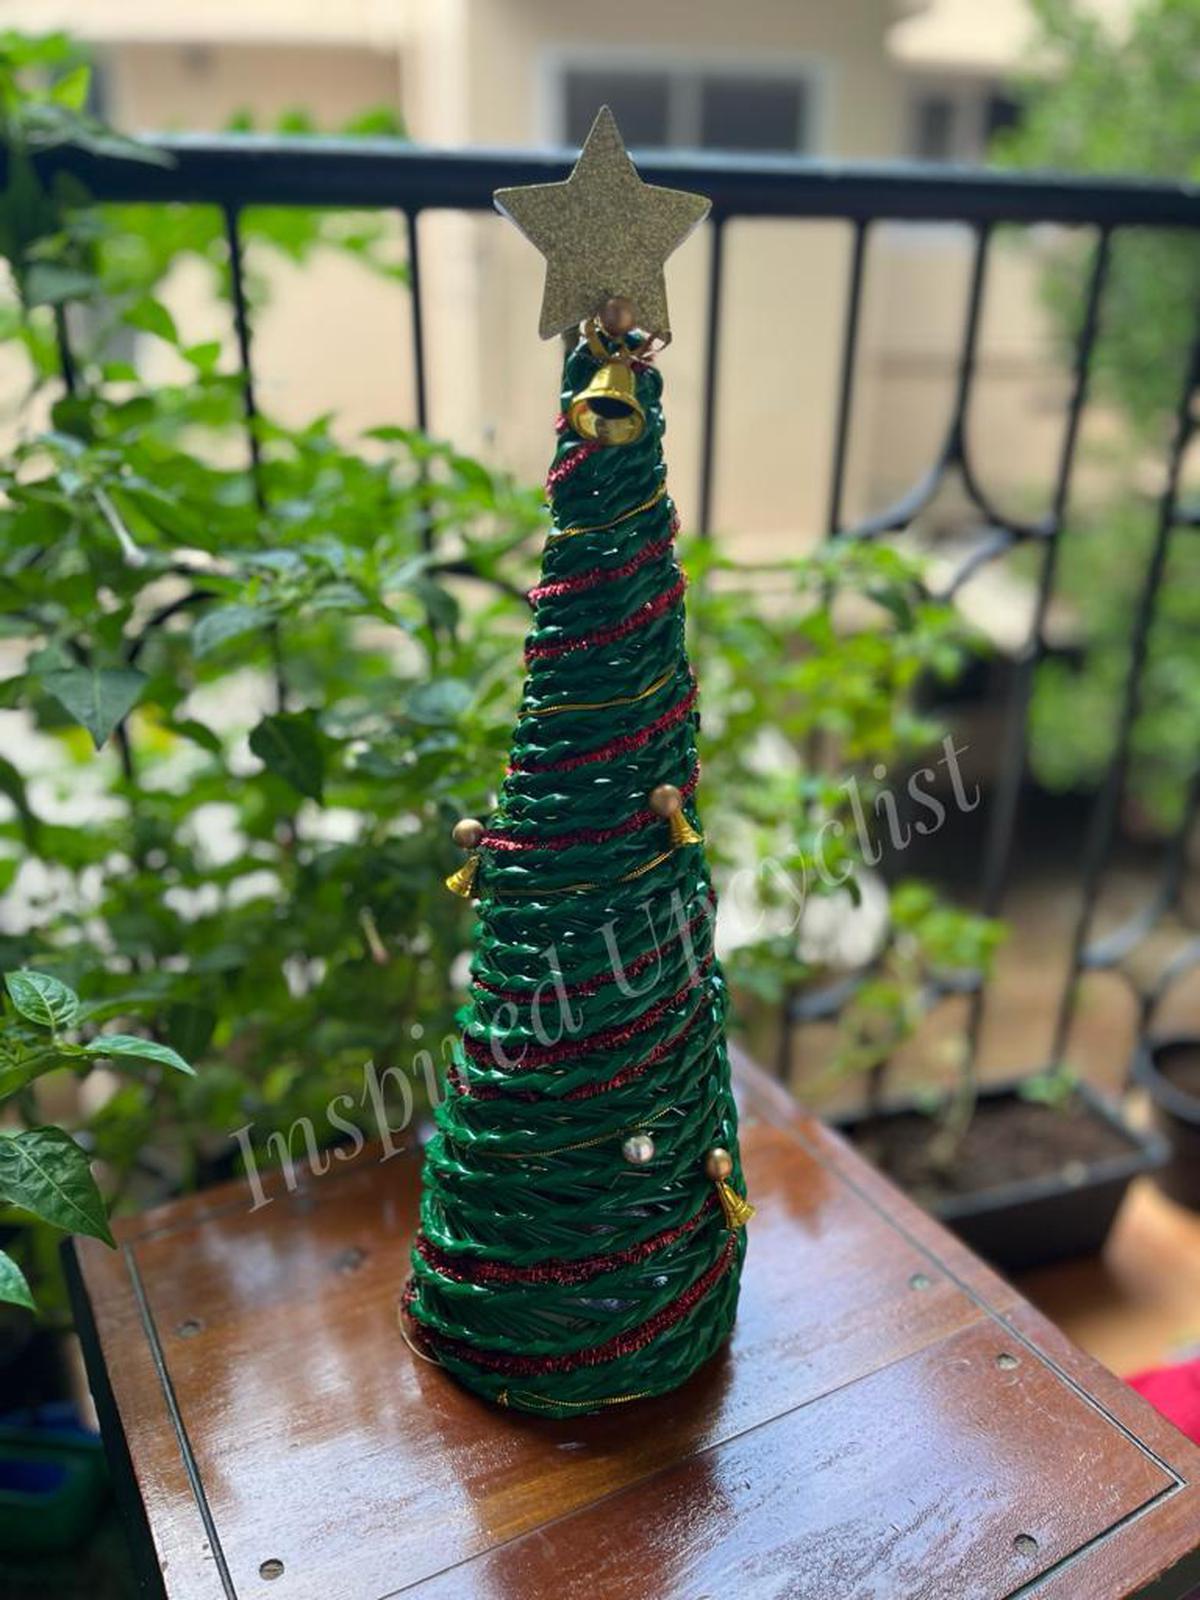  A Christmas tree made from recycled  newspaper by Parvathi Mayamadhavi.